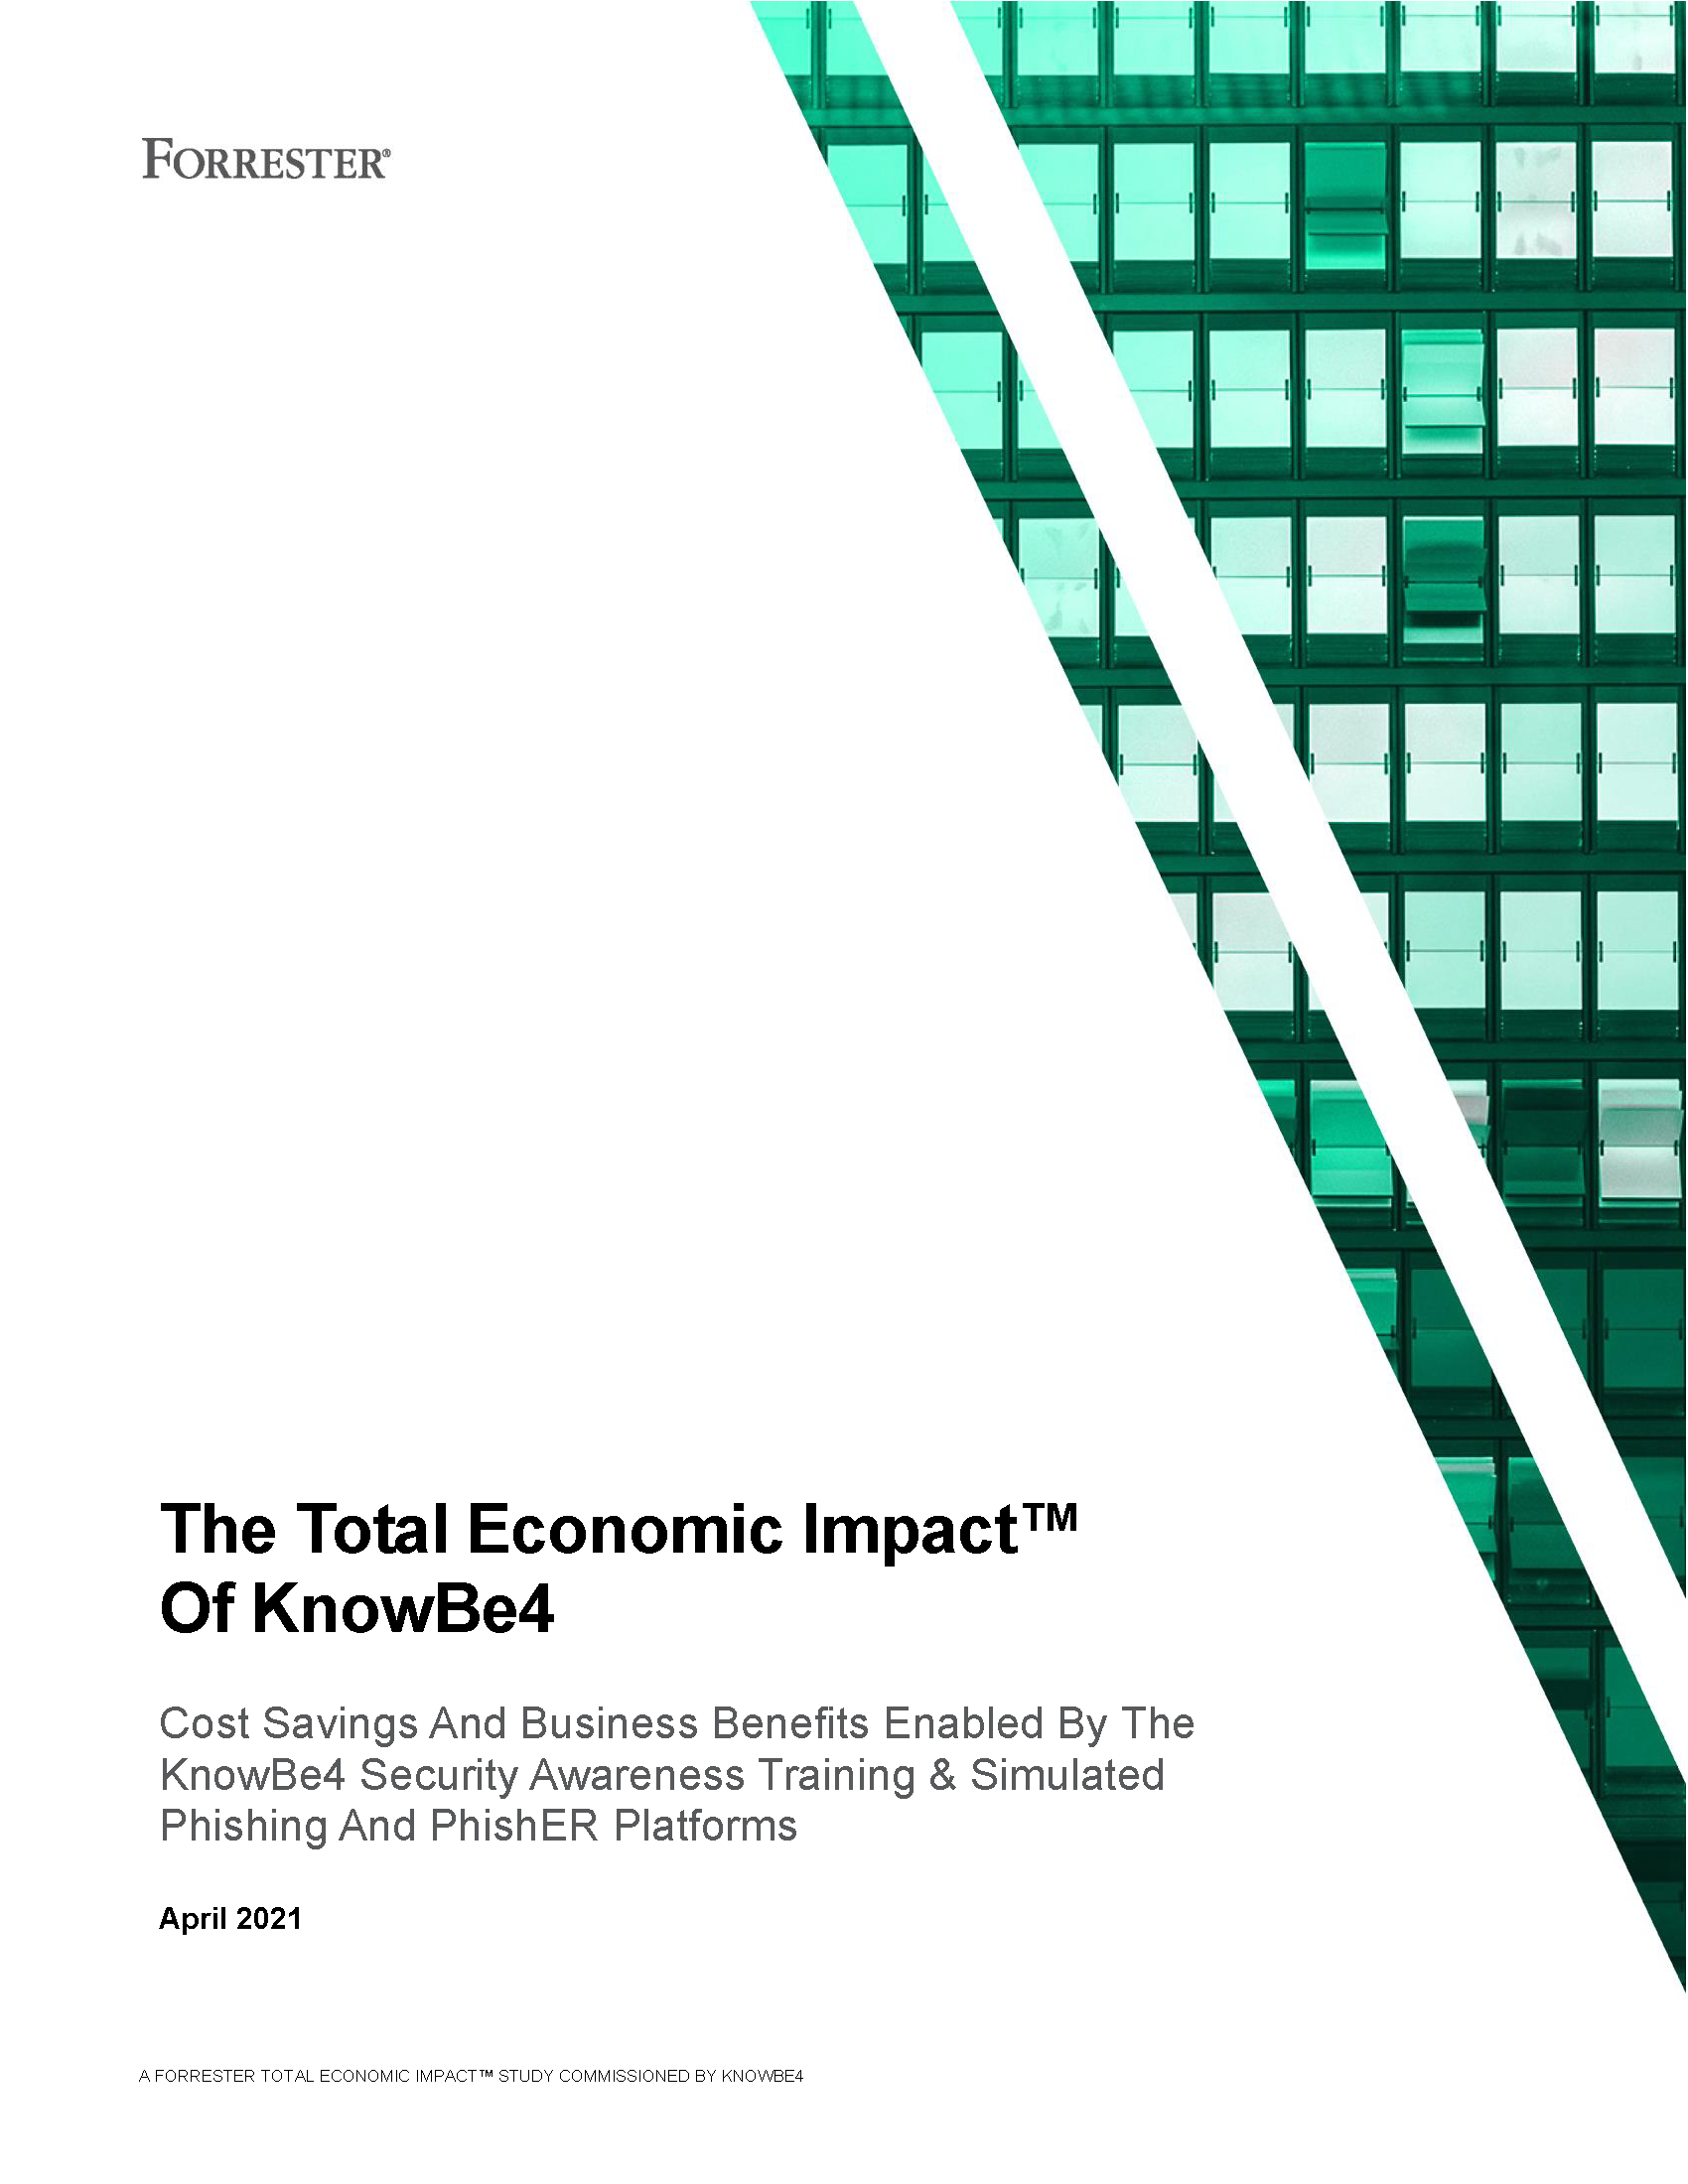 Pages from Forrester Report. The total economic impact of KnowB4